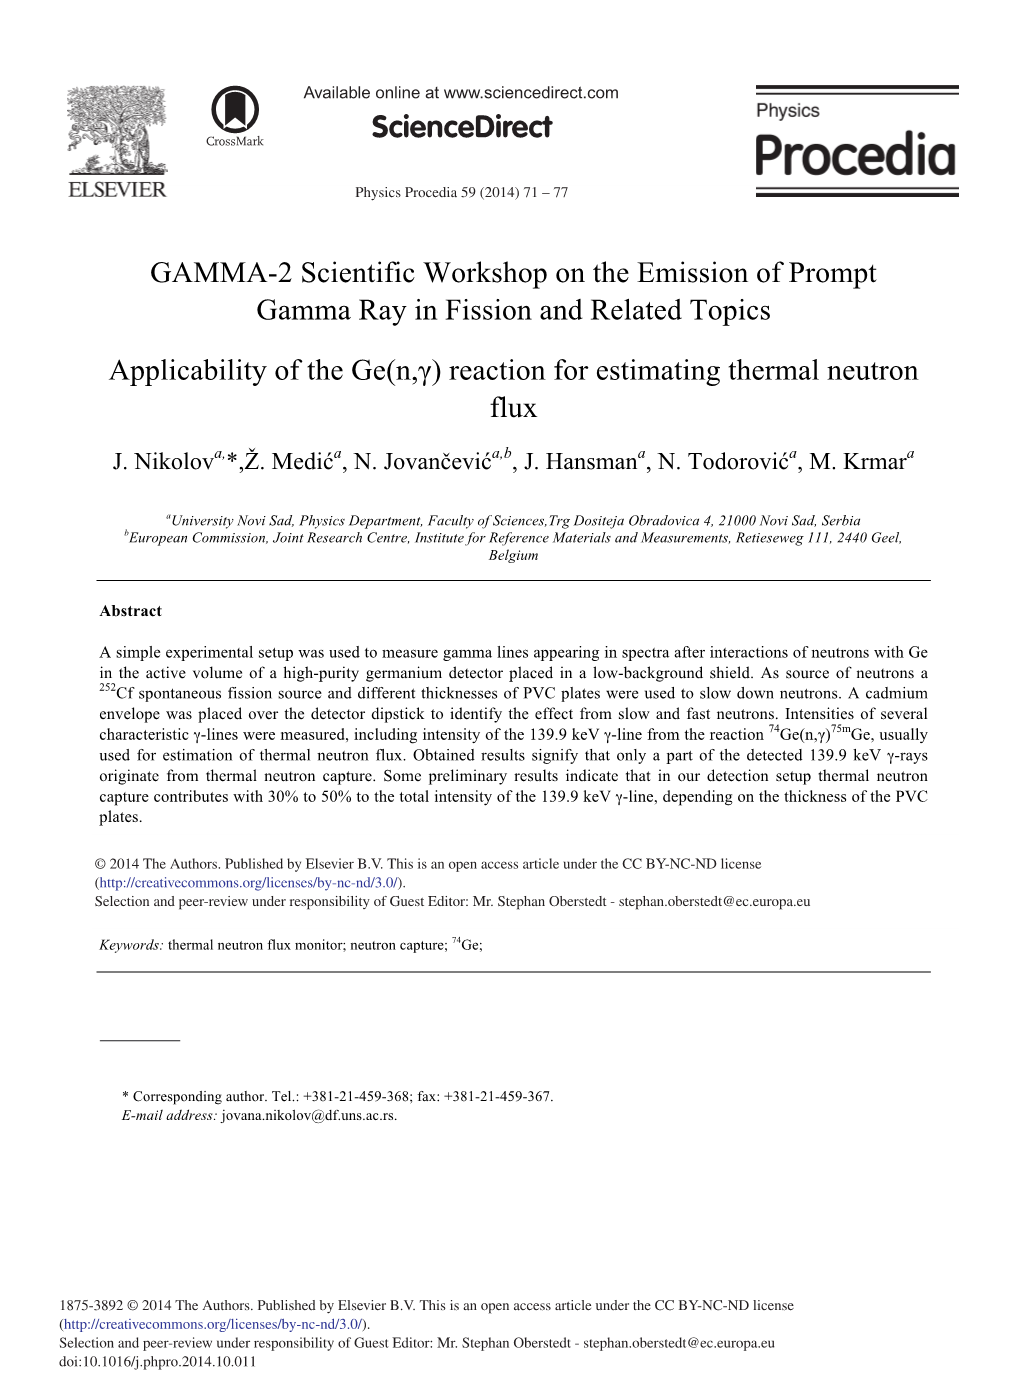 Applicability of the Ge(N,Γ) Reaction for Estimating Thermal Neutron Flux